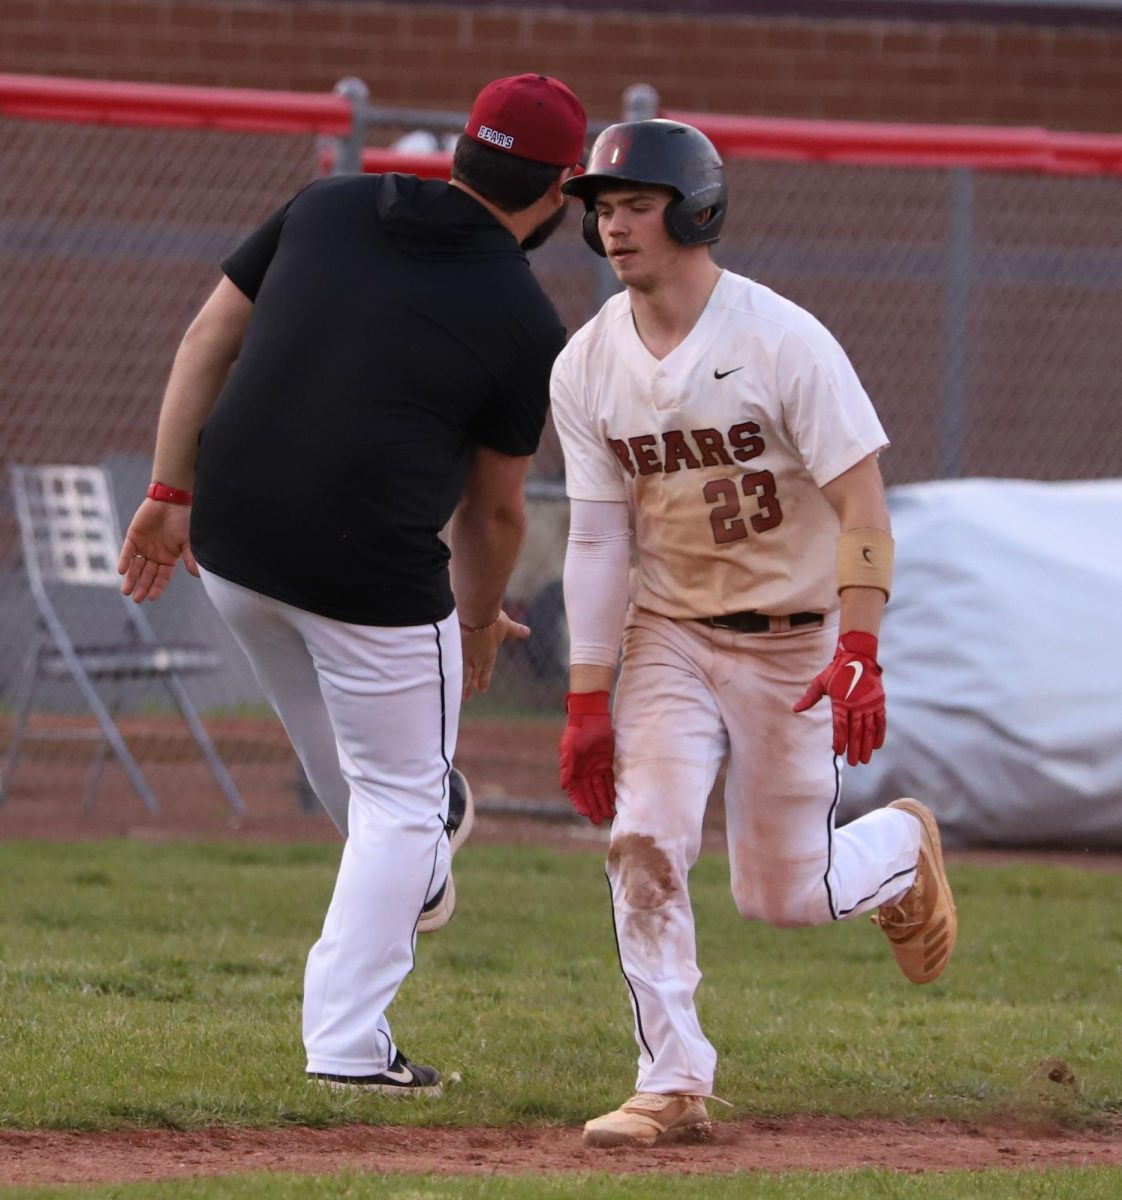 Harlan+Countys+Jonah+Swanner+was+congratulated+by+HCHS+coach+Scotty+Bailey+after+his+homer+in+the+fifth+inning+of+the+Bears+3-0+win+Monday+over+visiting+Lee%2C+Va.